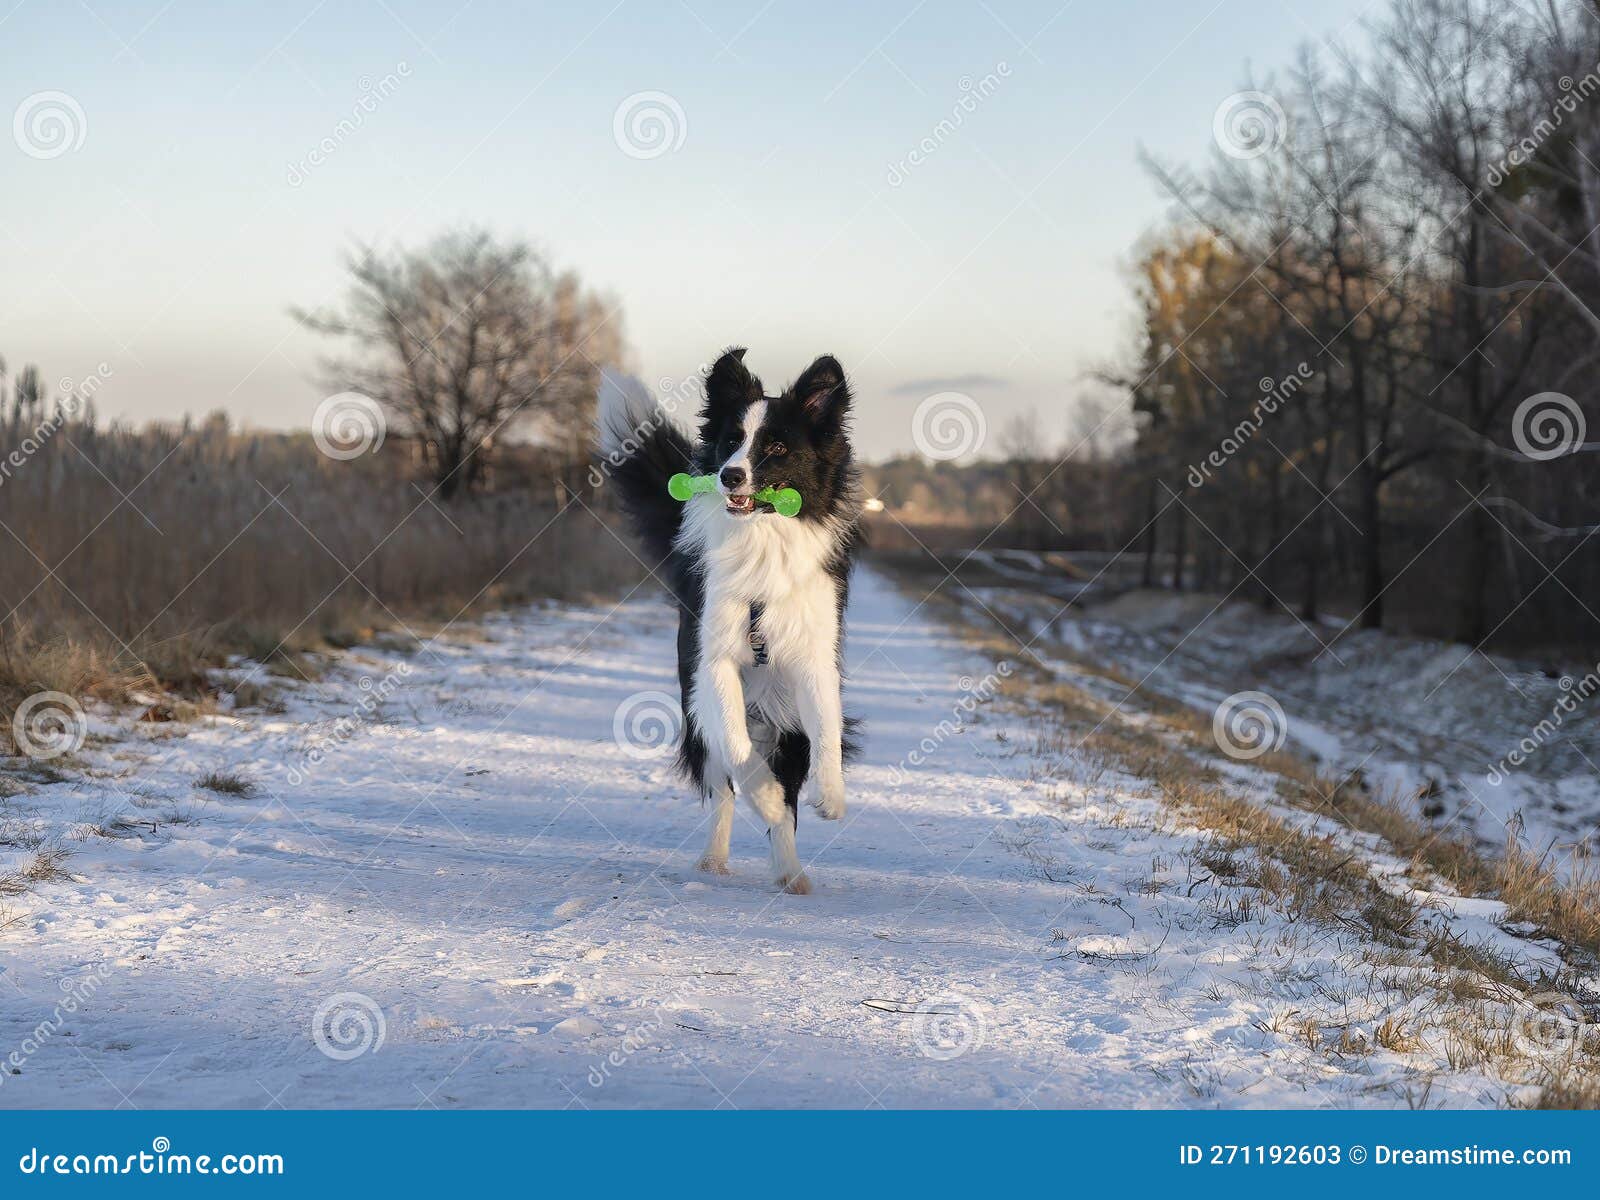 training border collie named ozzy. debe, legionowo district